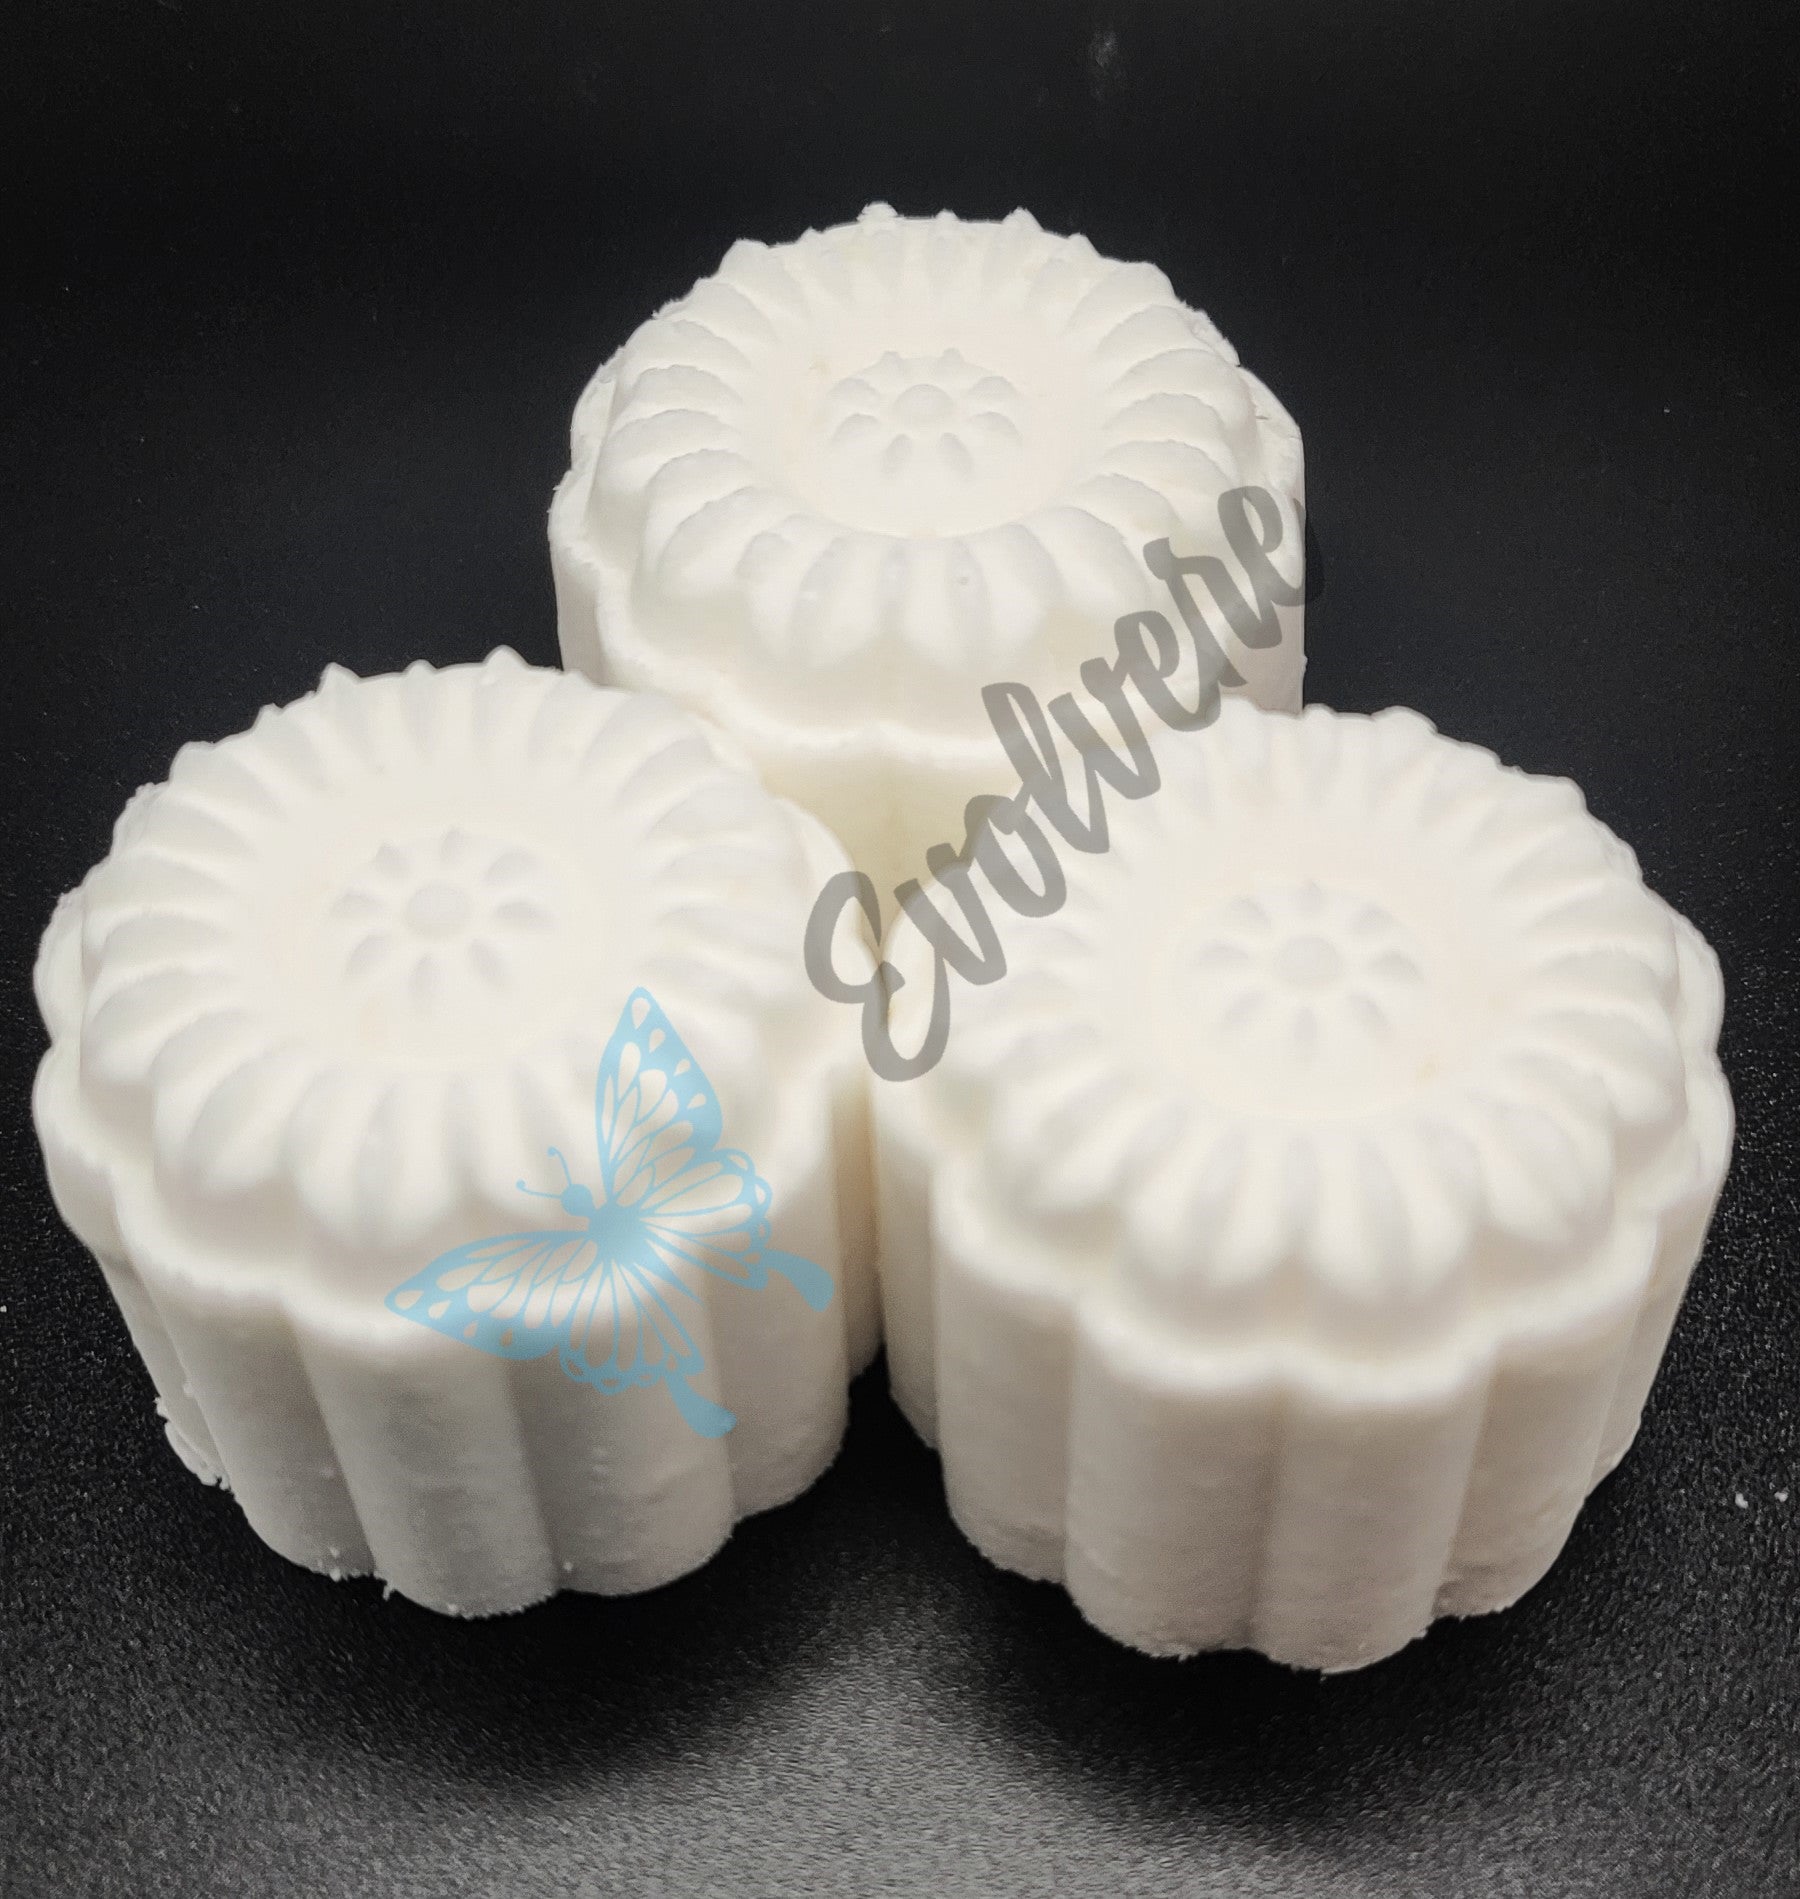 Three (3) white shower steamers in a flower shape. 